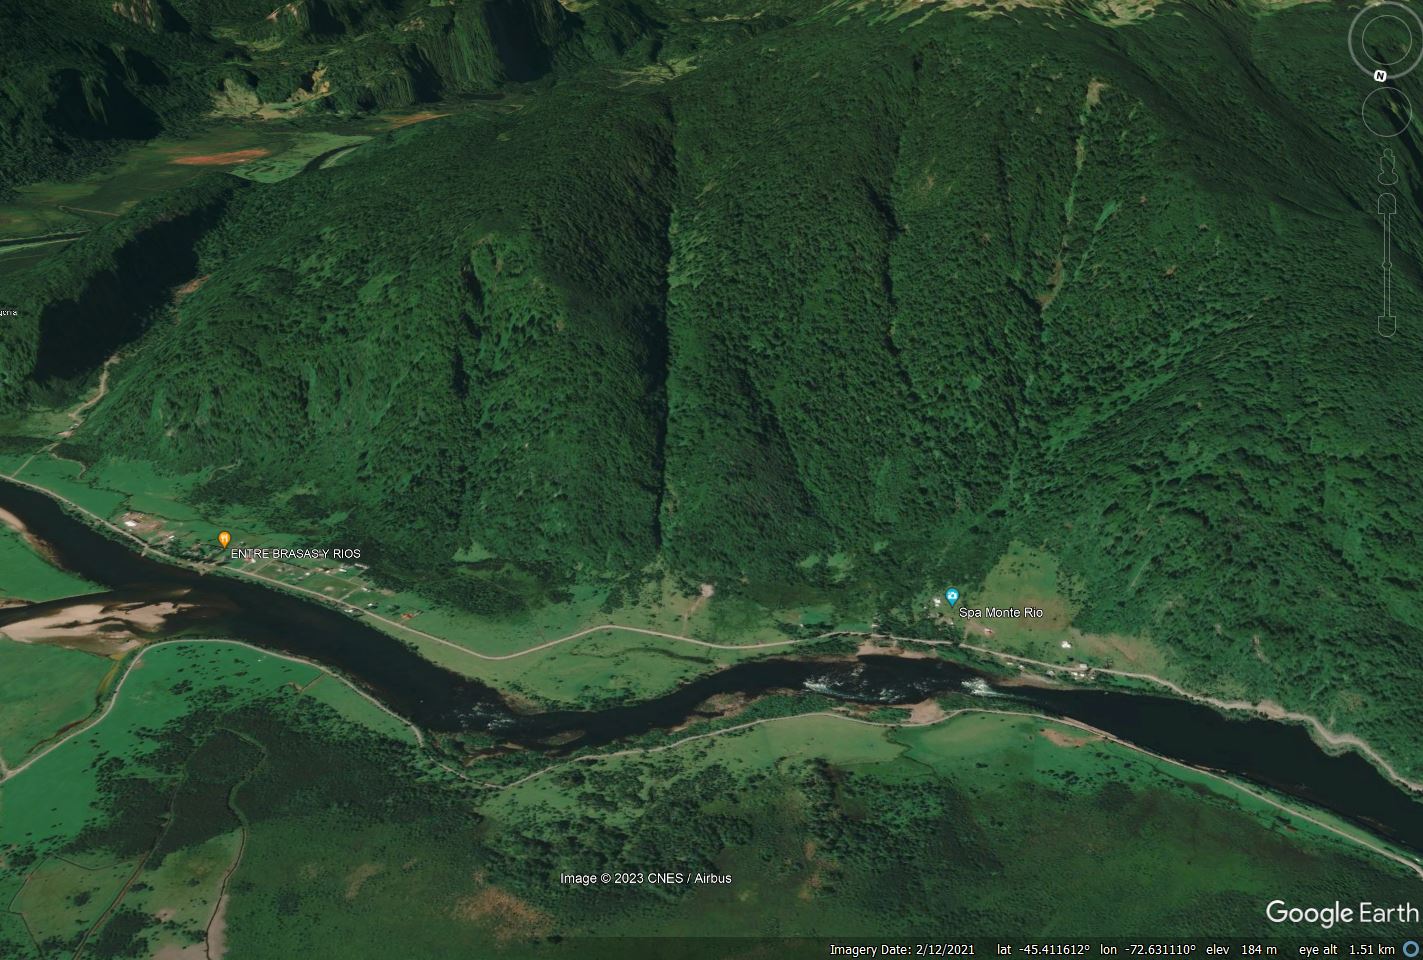 Google Earth image of the site of the large debris flow close to Lago Riesco in Chile on 11 March 2023. 